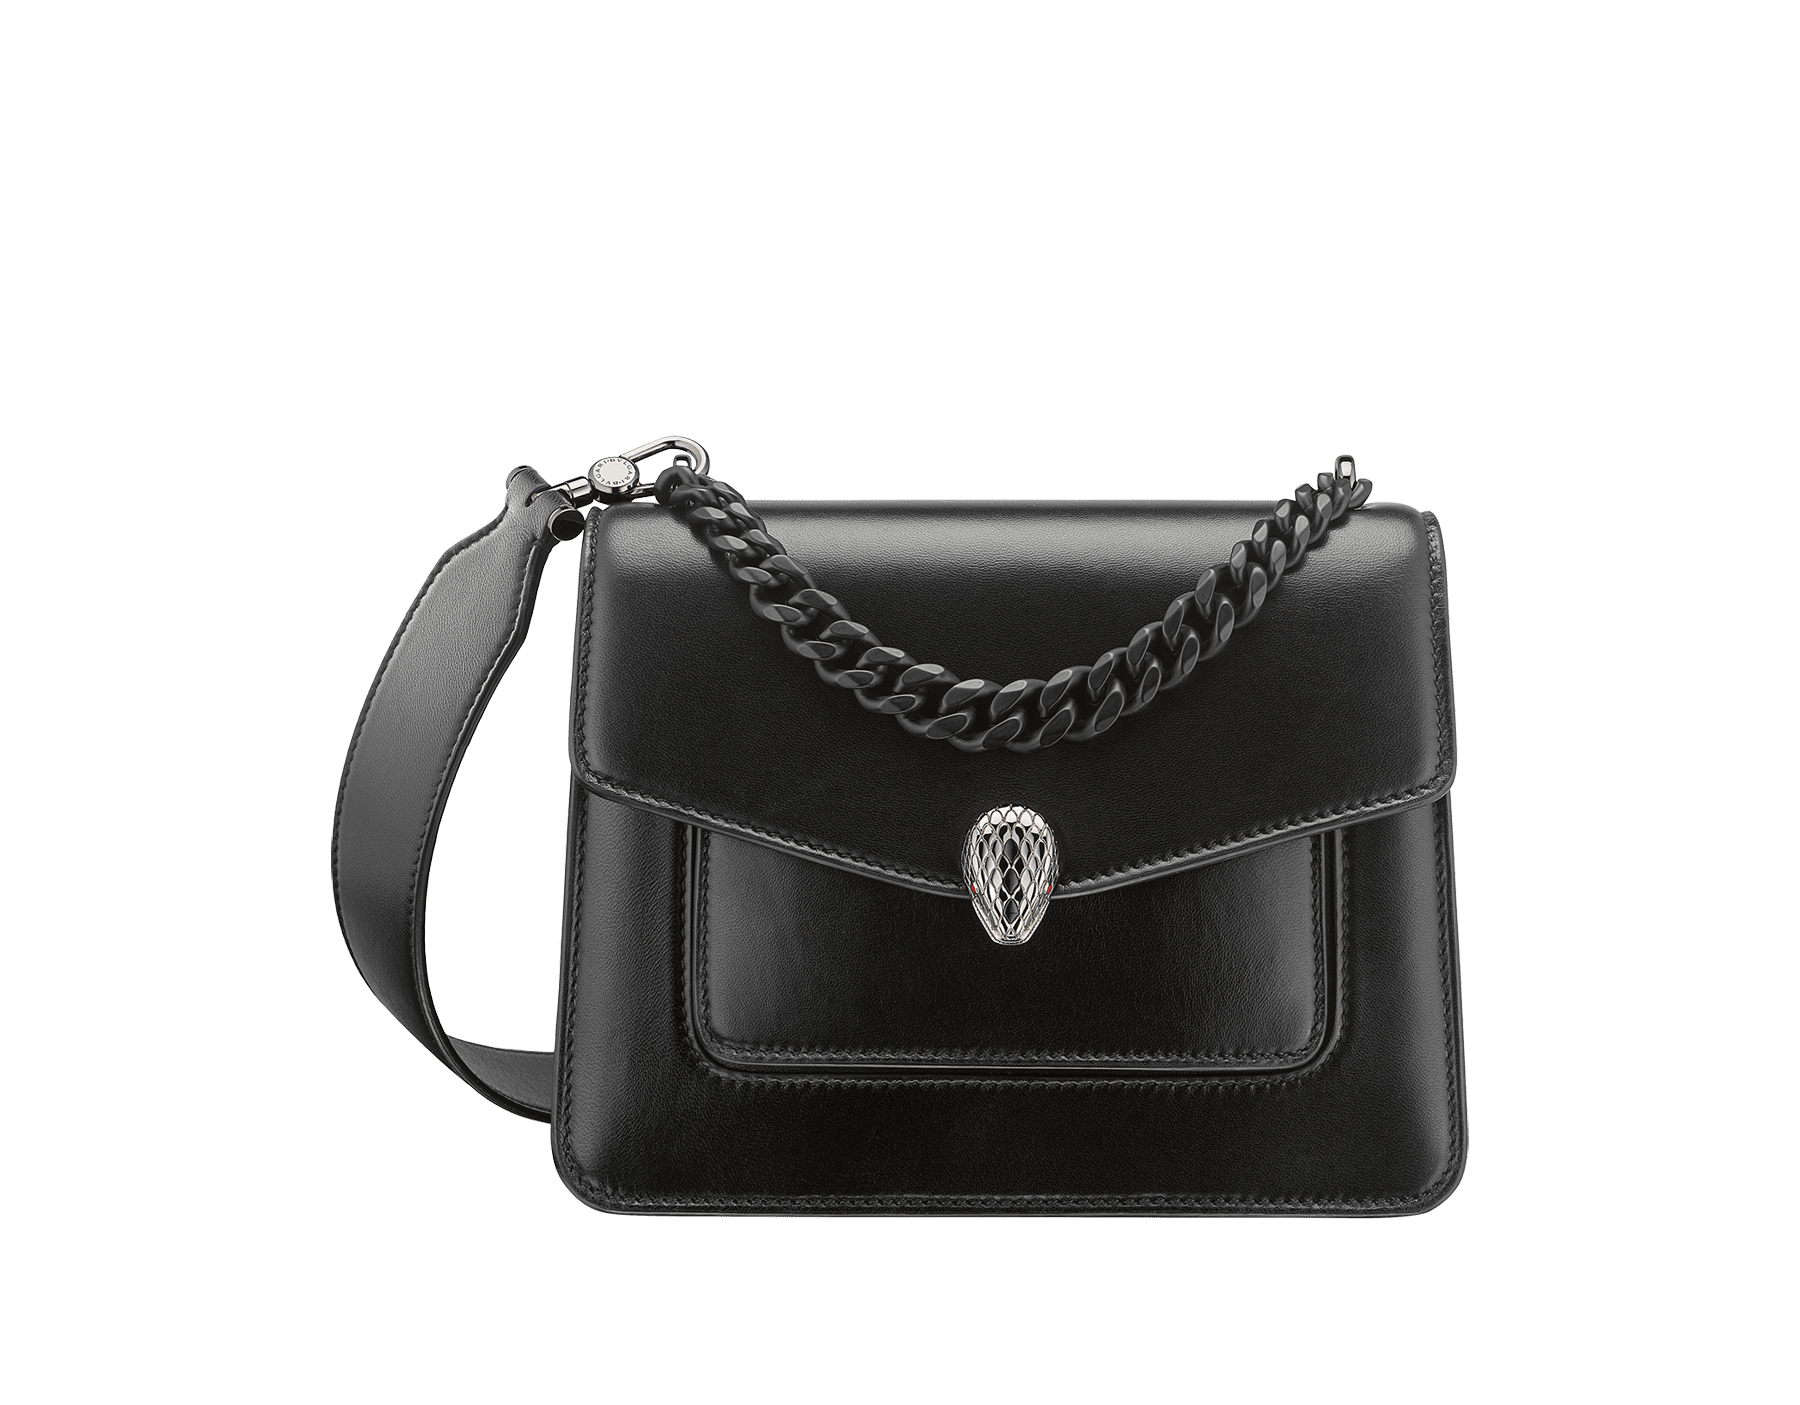 "Serpenti Forever" small maxi chain crossbody bag in black nappa leather, with black nappa leather inner lining. New Serpenti head closure in dark ruthenium-plated brass and finished with small black onyx scales in the middle and red enamel eyes. 1134-MCNb image 1